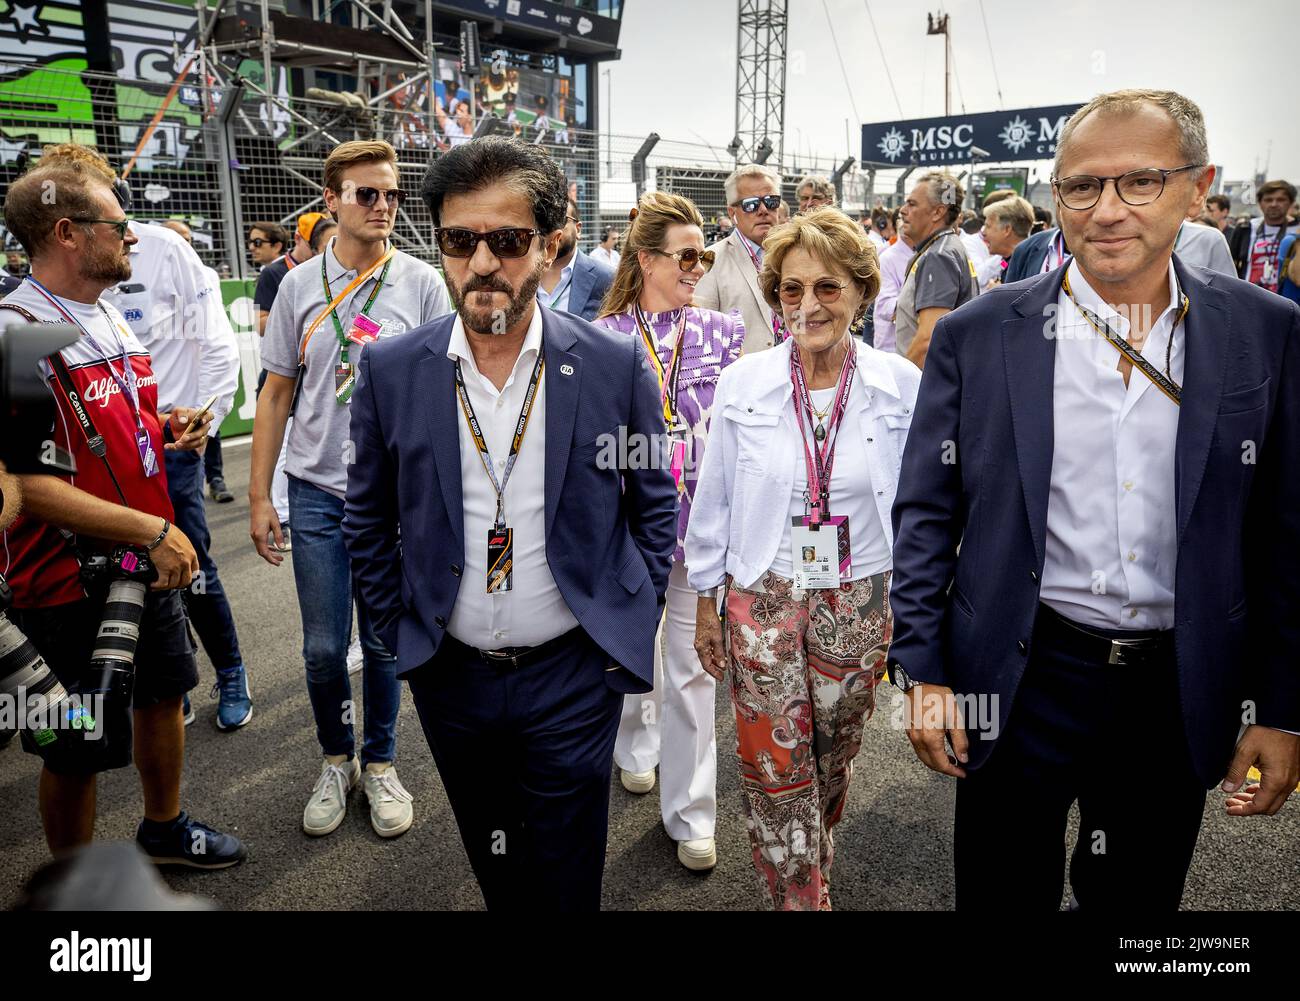 Zandvoort, Netherlands. 04th Sep, 2022. ZANDVOORT - Mohammed Ben Sulayem, Princess Anette, Princess Margriet and Stefano Domenicali ahead of the F1 Grand Prix of the Netherlands at Circuit van Zandvoort on September 4, 2022 in Zandvoort, Netherlands. KOEN VAN WEEL Credit: ANP/Alamy Live News Stock Photo